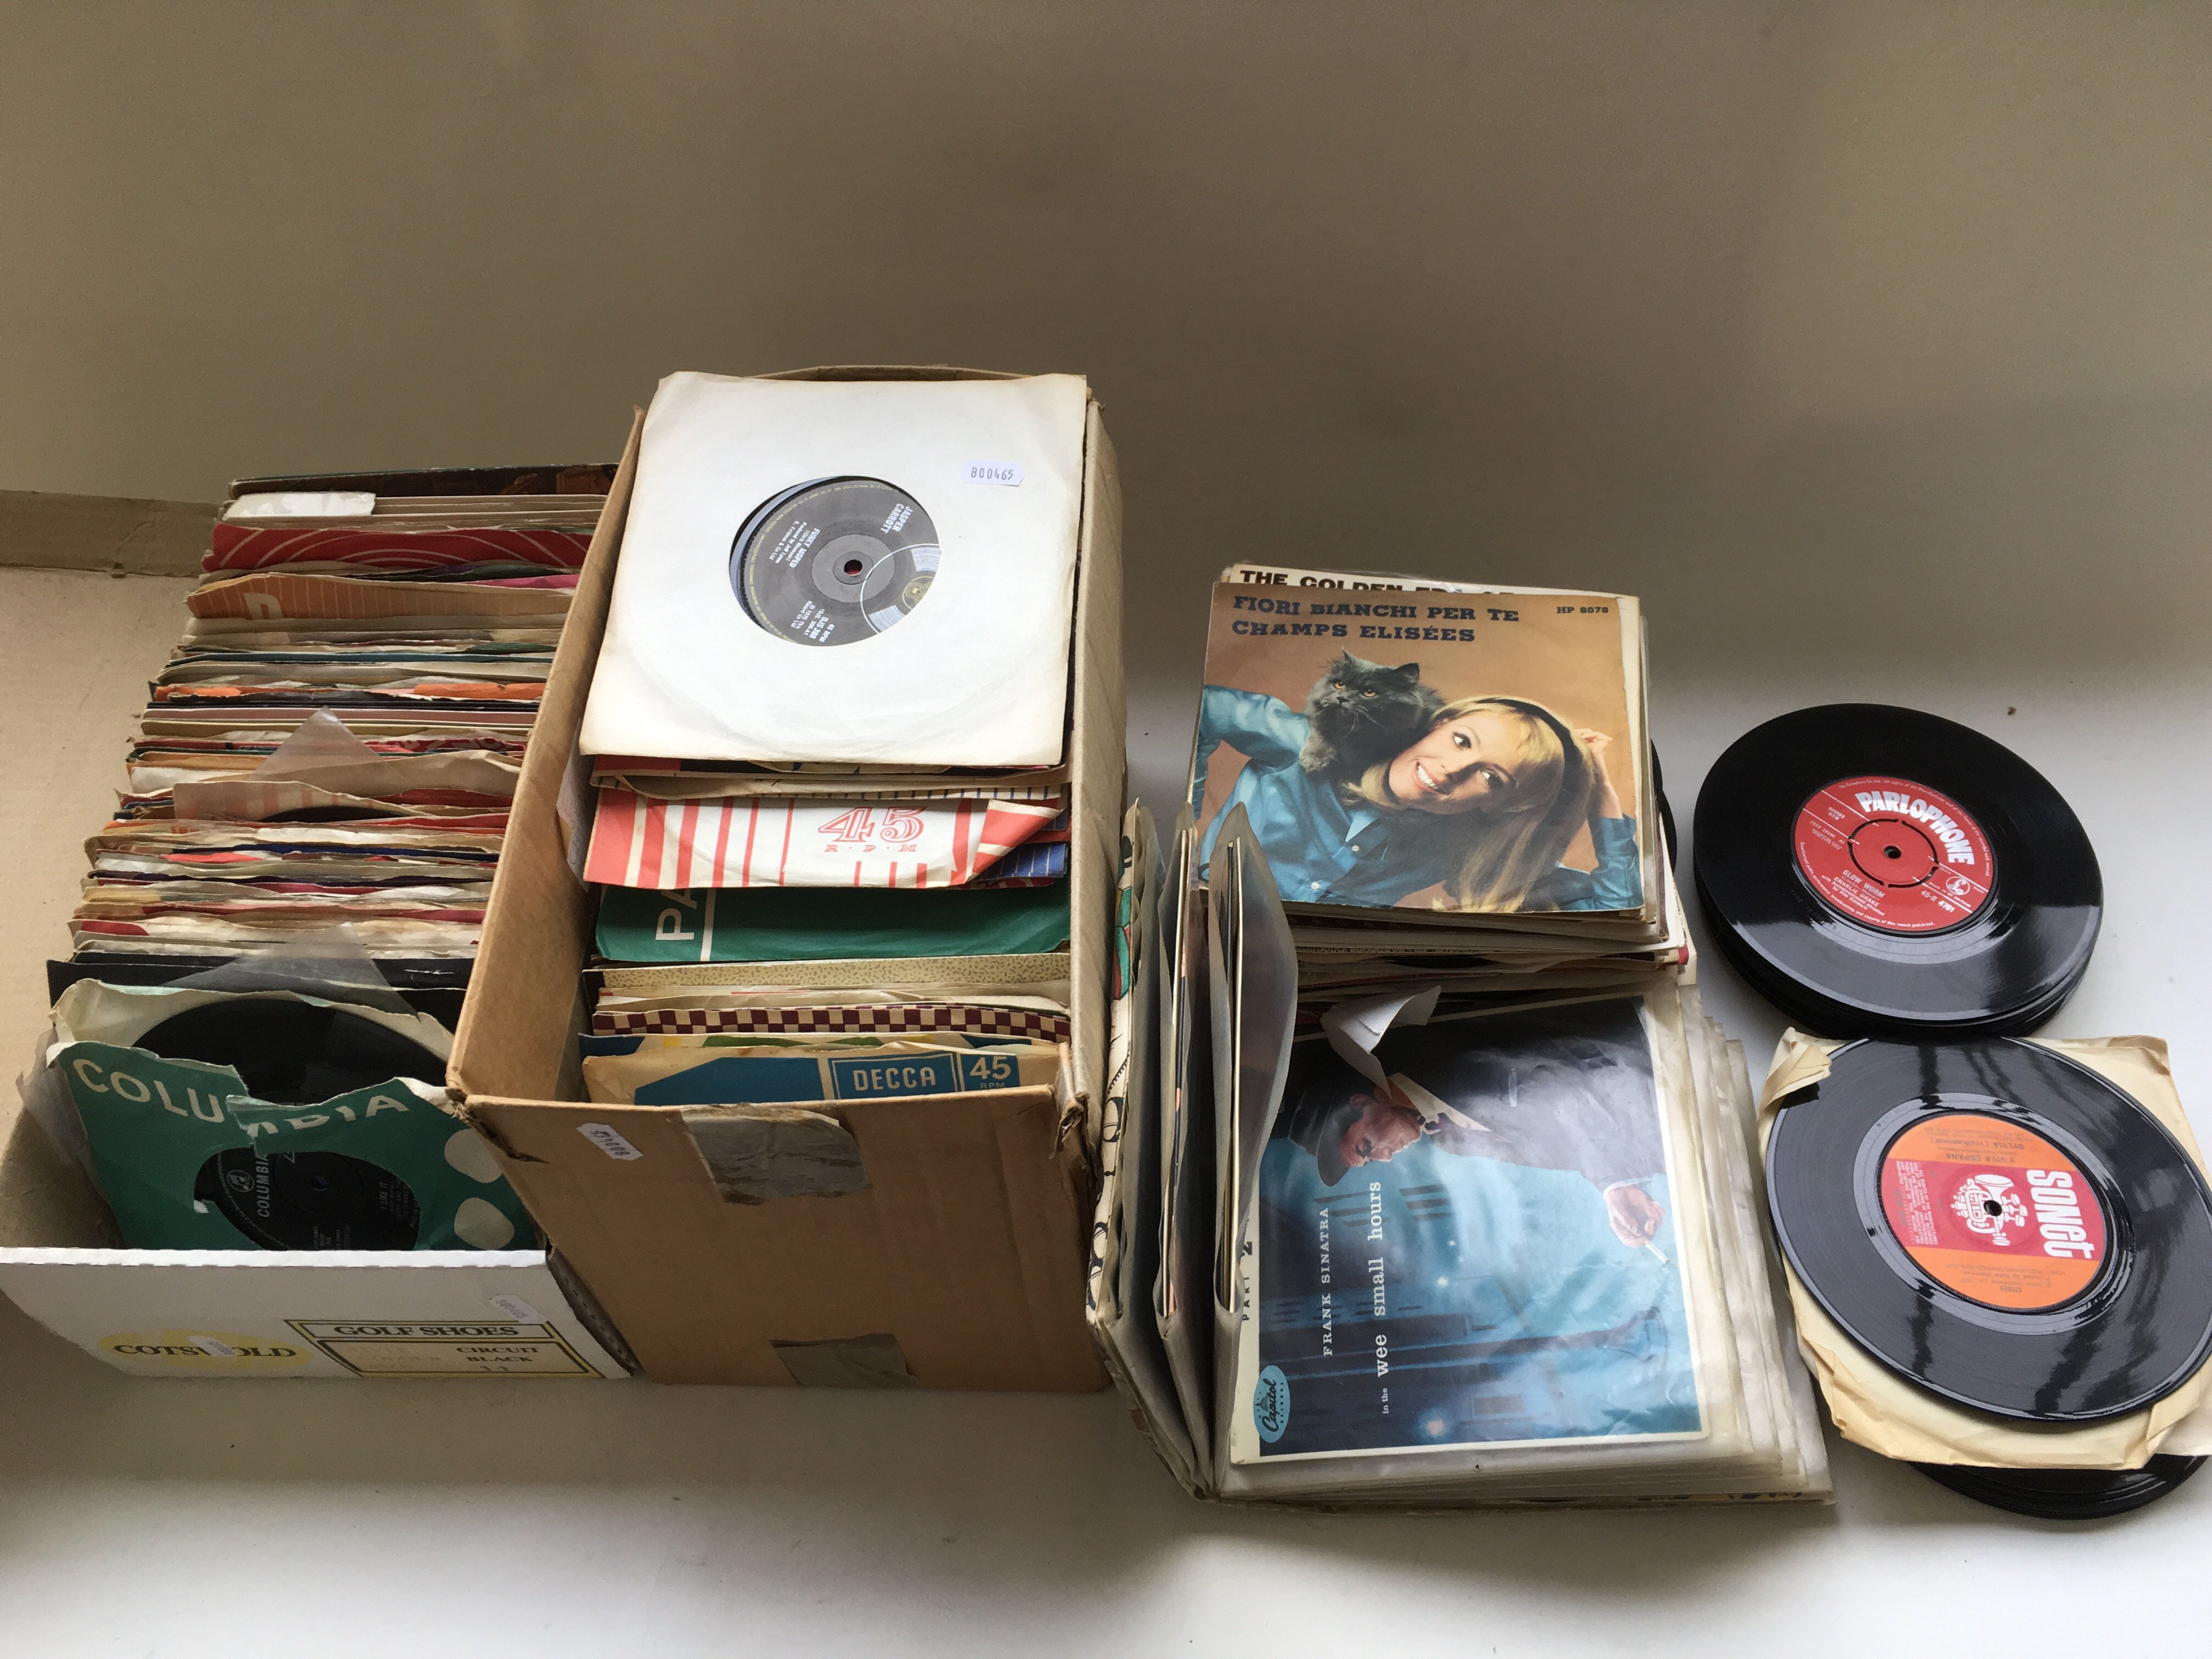 7 LPs and a collection of 7 inch singles by variou - Image 2 of 2